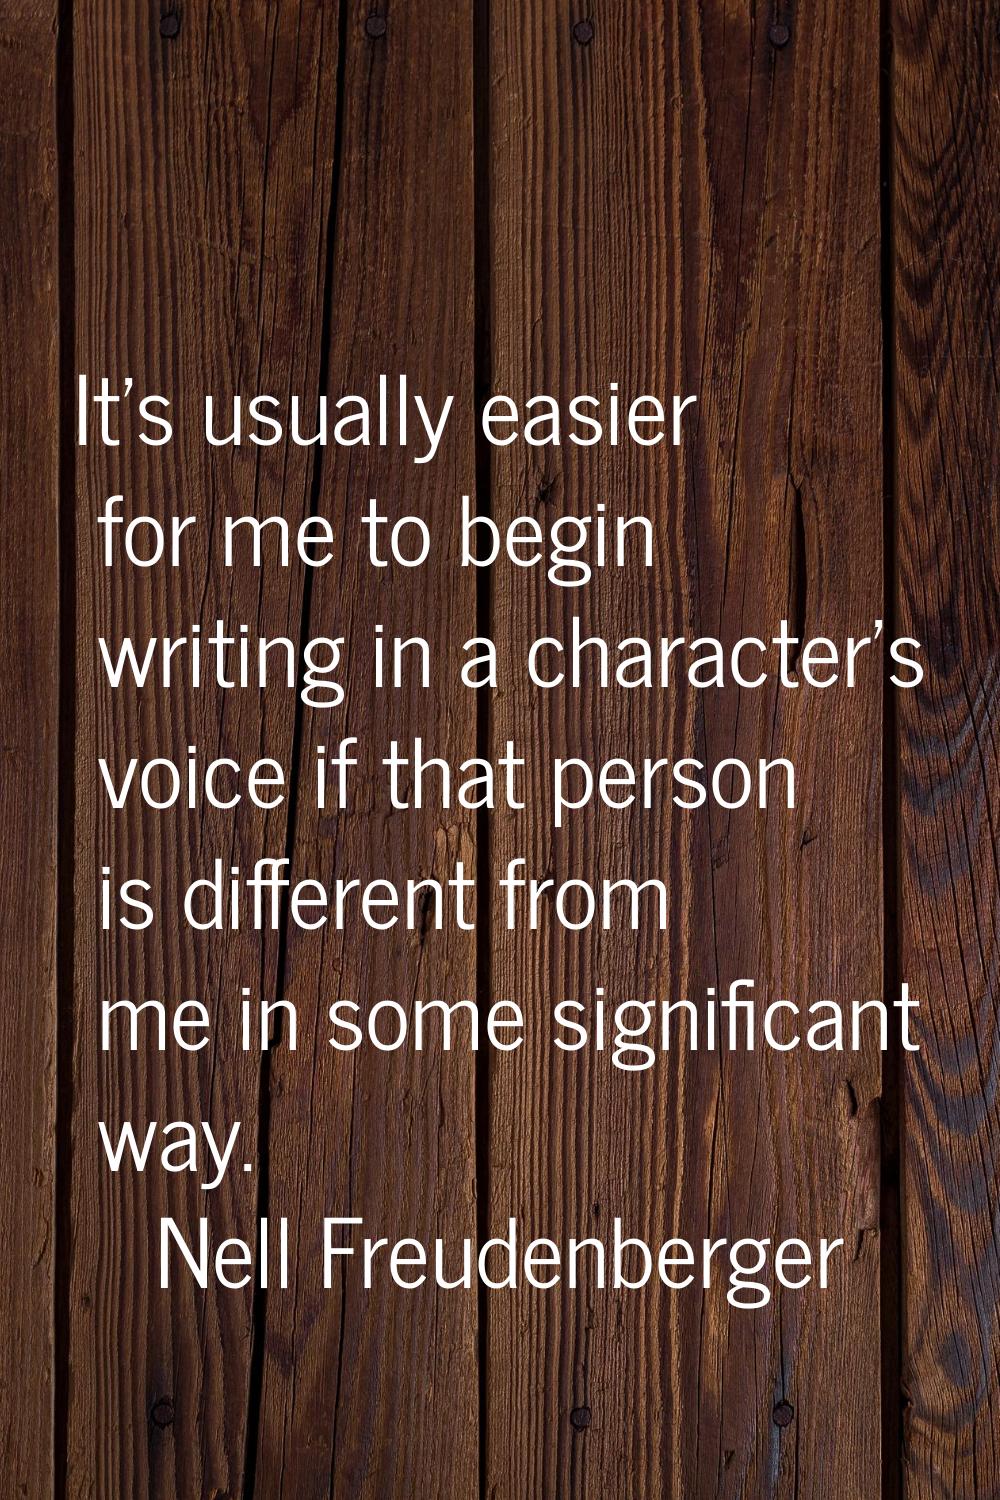 It's usually easier for me to begin writing in a character's voice if that person is different from